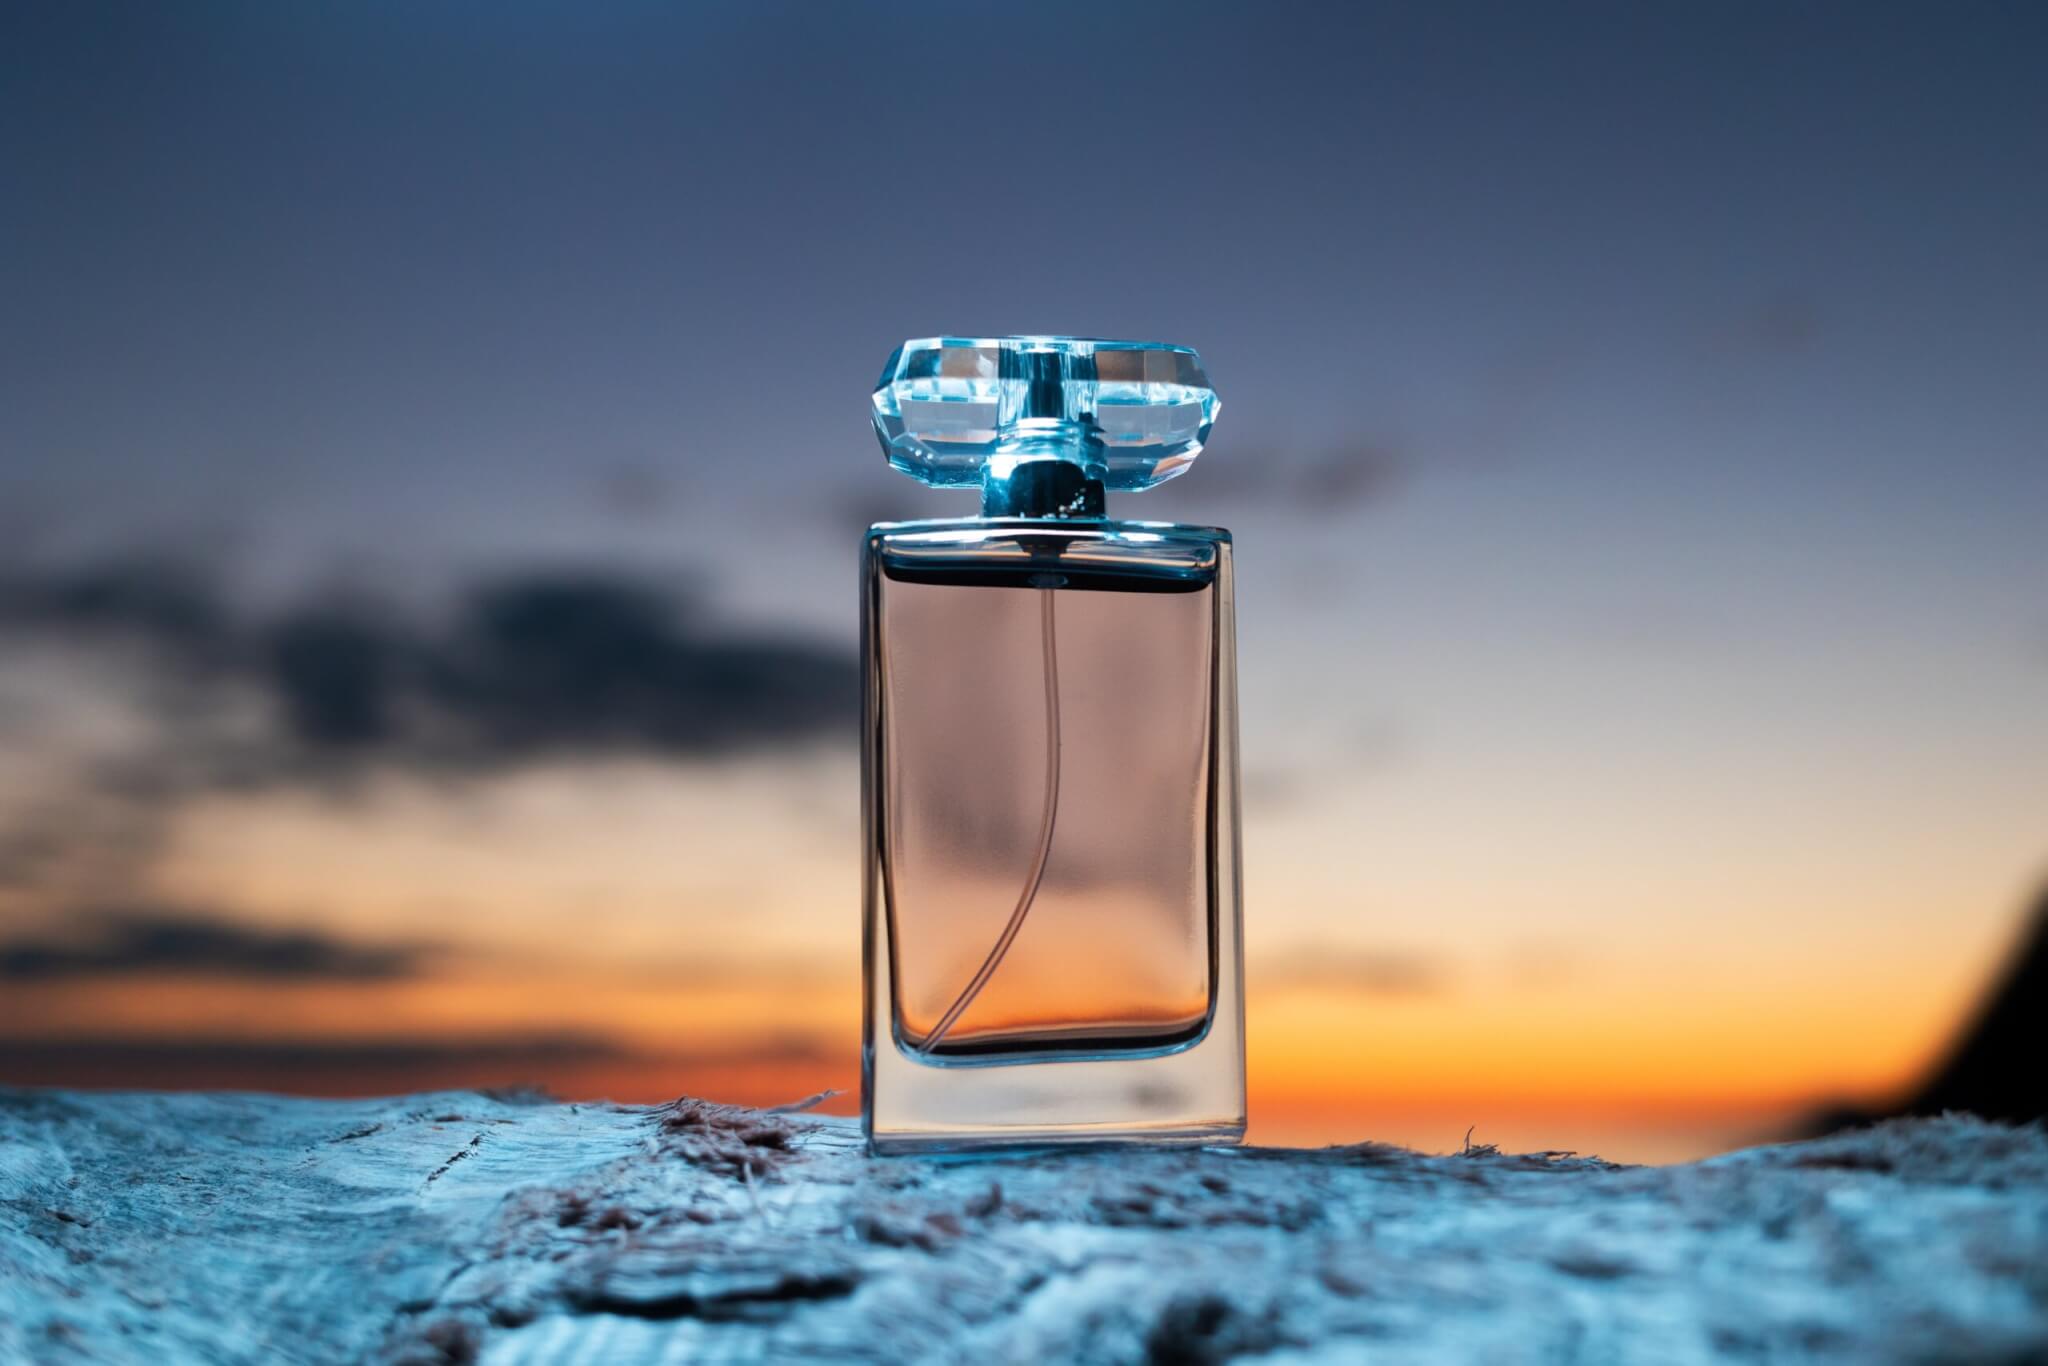 Perfume bottle in front of a sunset